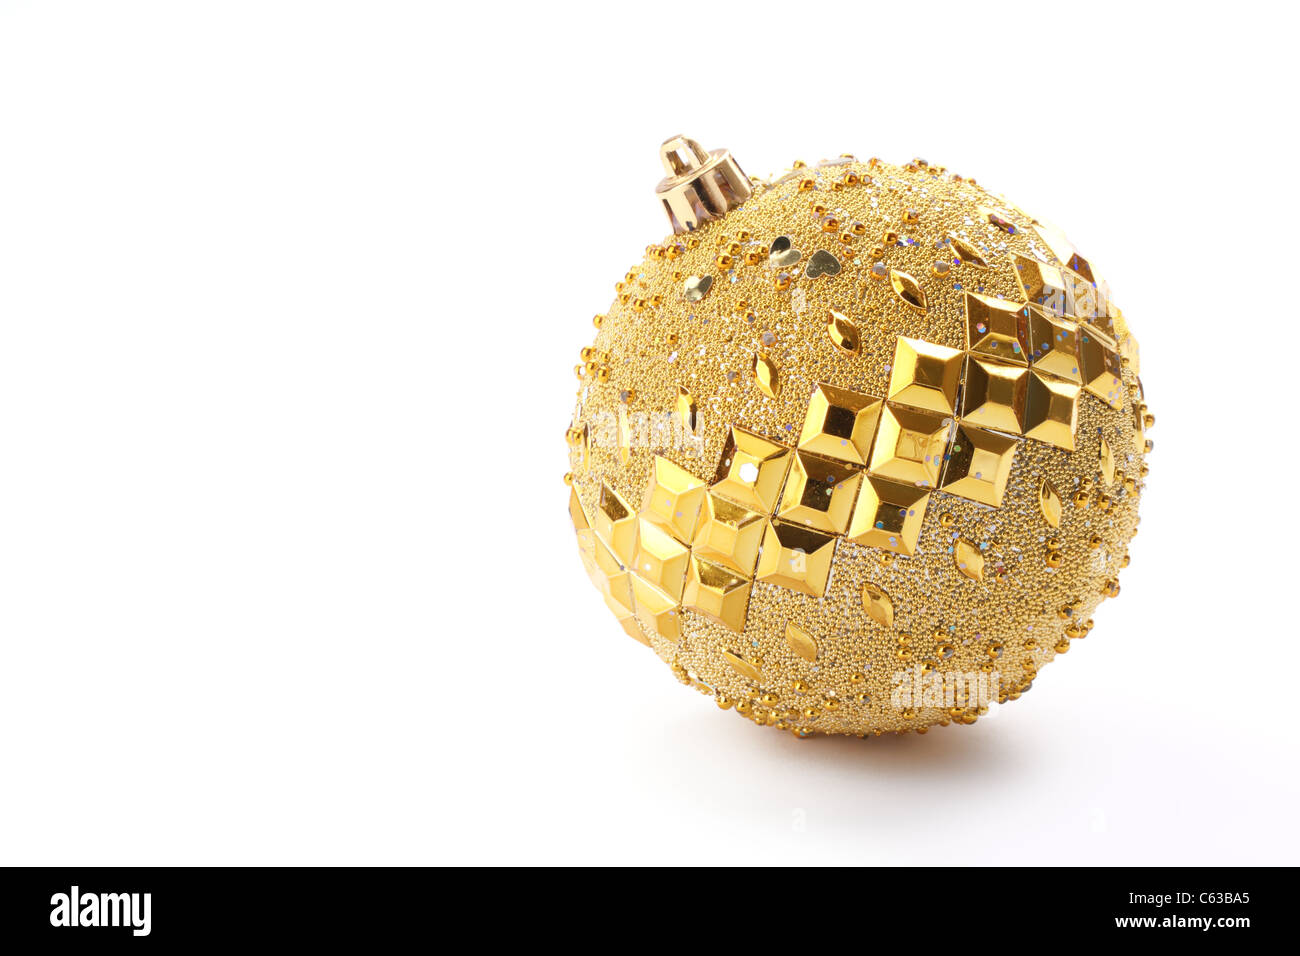 Gold Christmas ball on white background Banque D'Images